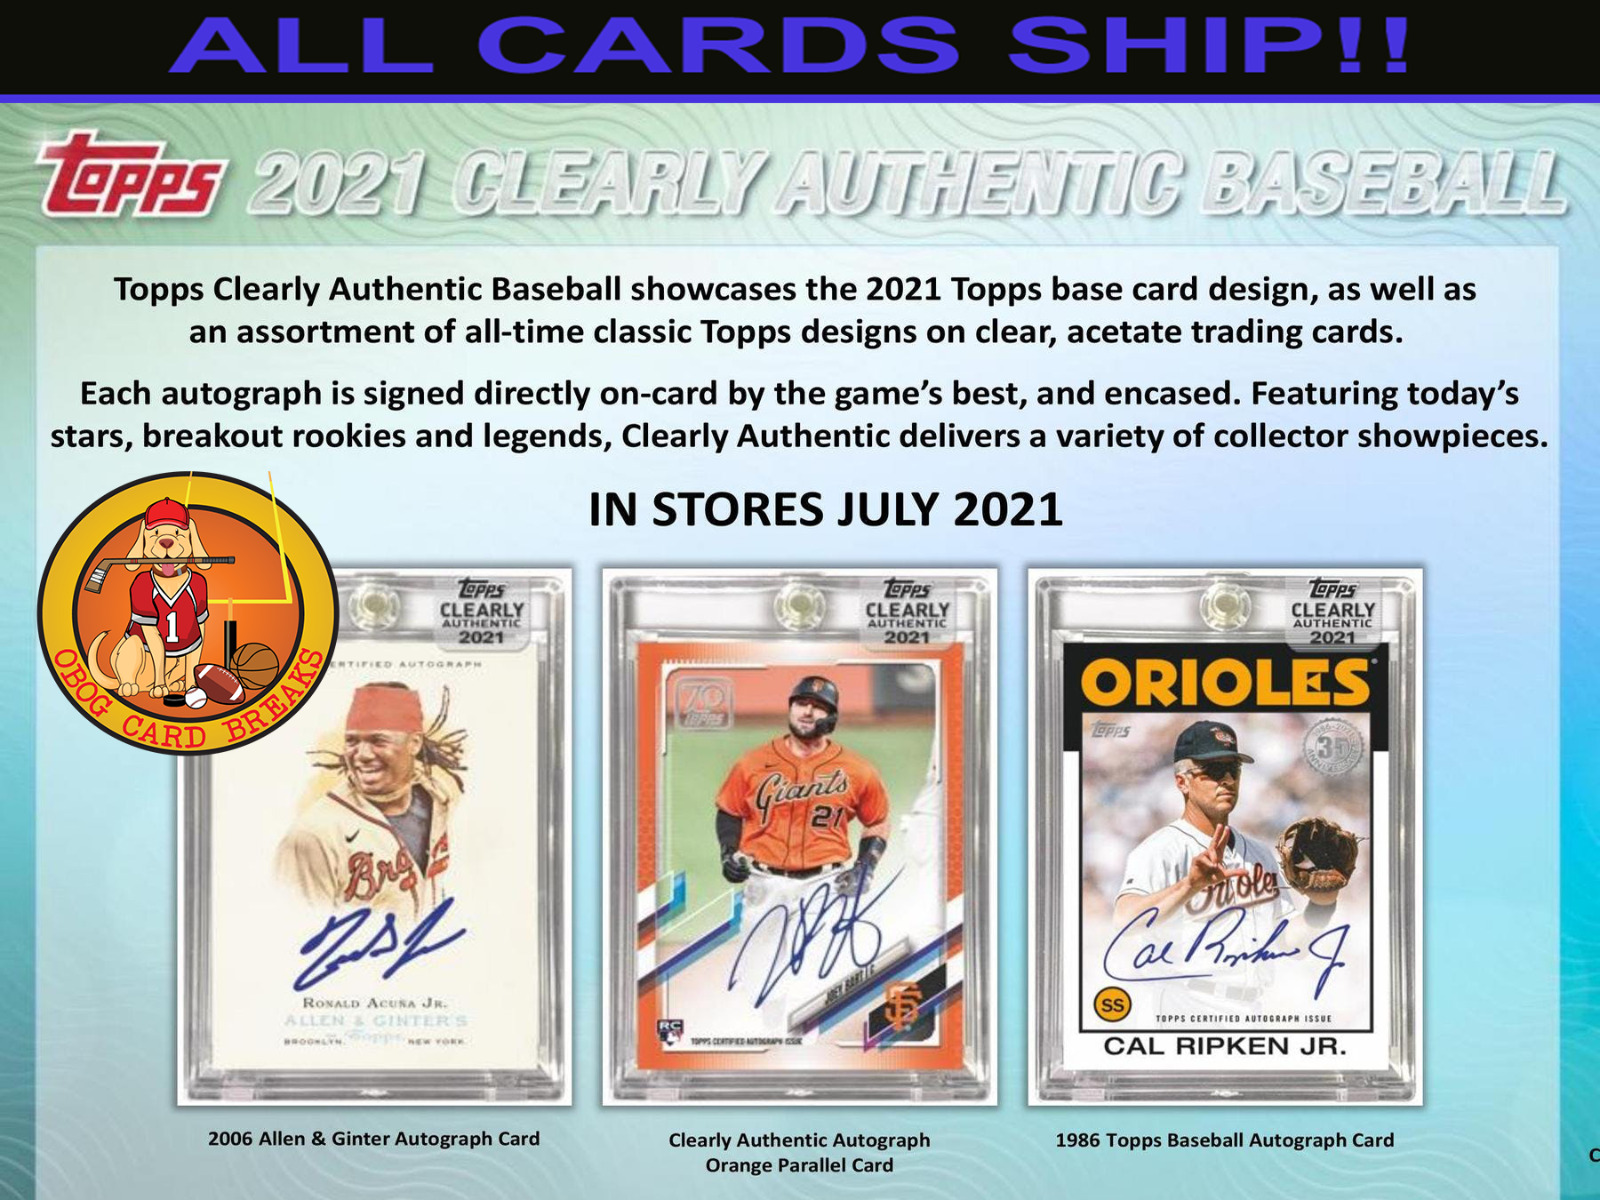 ST LOUIS CARDINALS  2021 TOPPS CLEARLY AUTHENTIC 1 CASE (20 BOXES) CASE BREAK #4